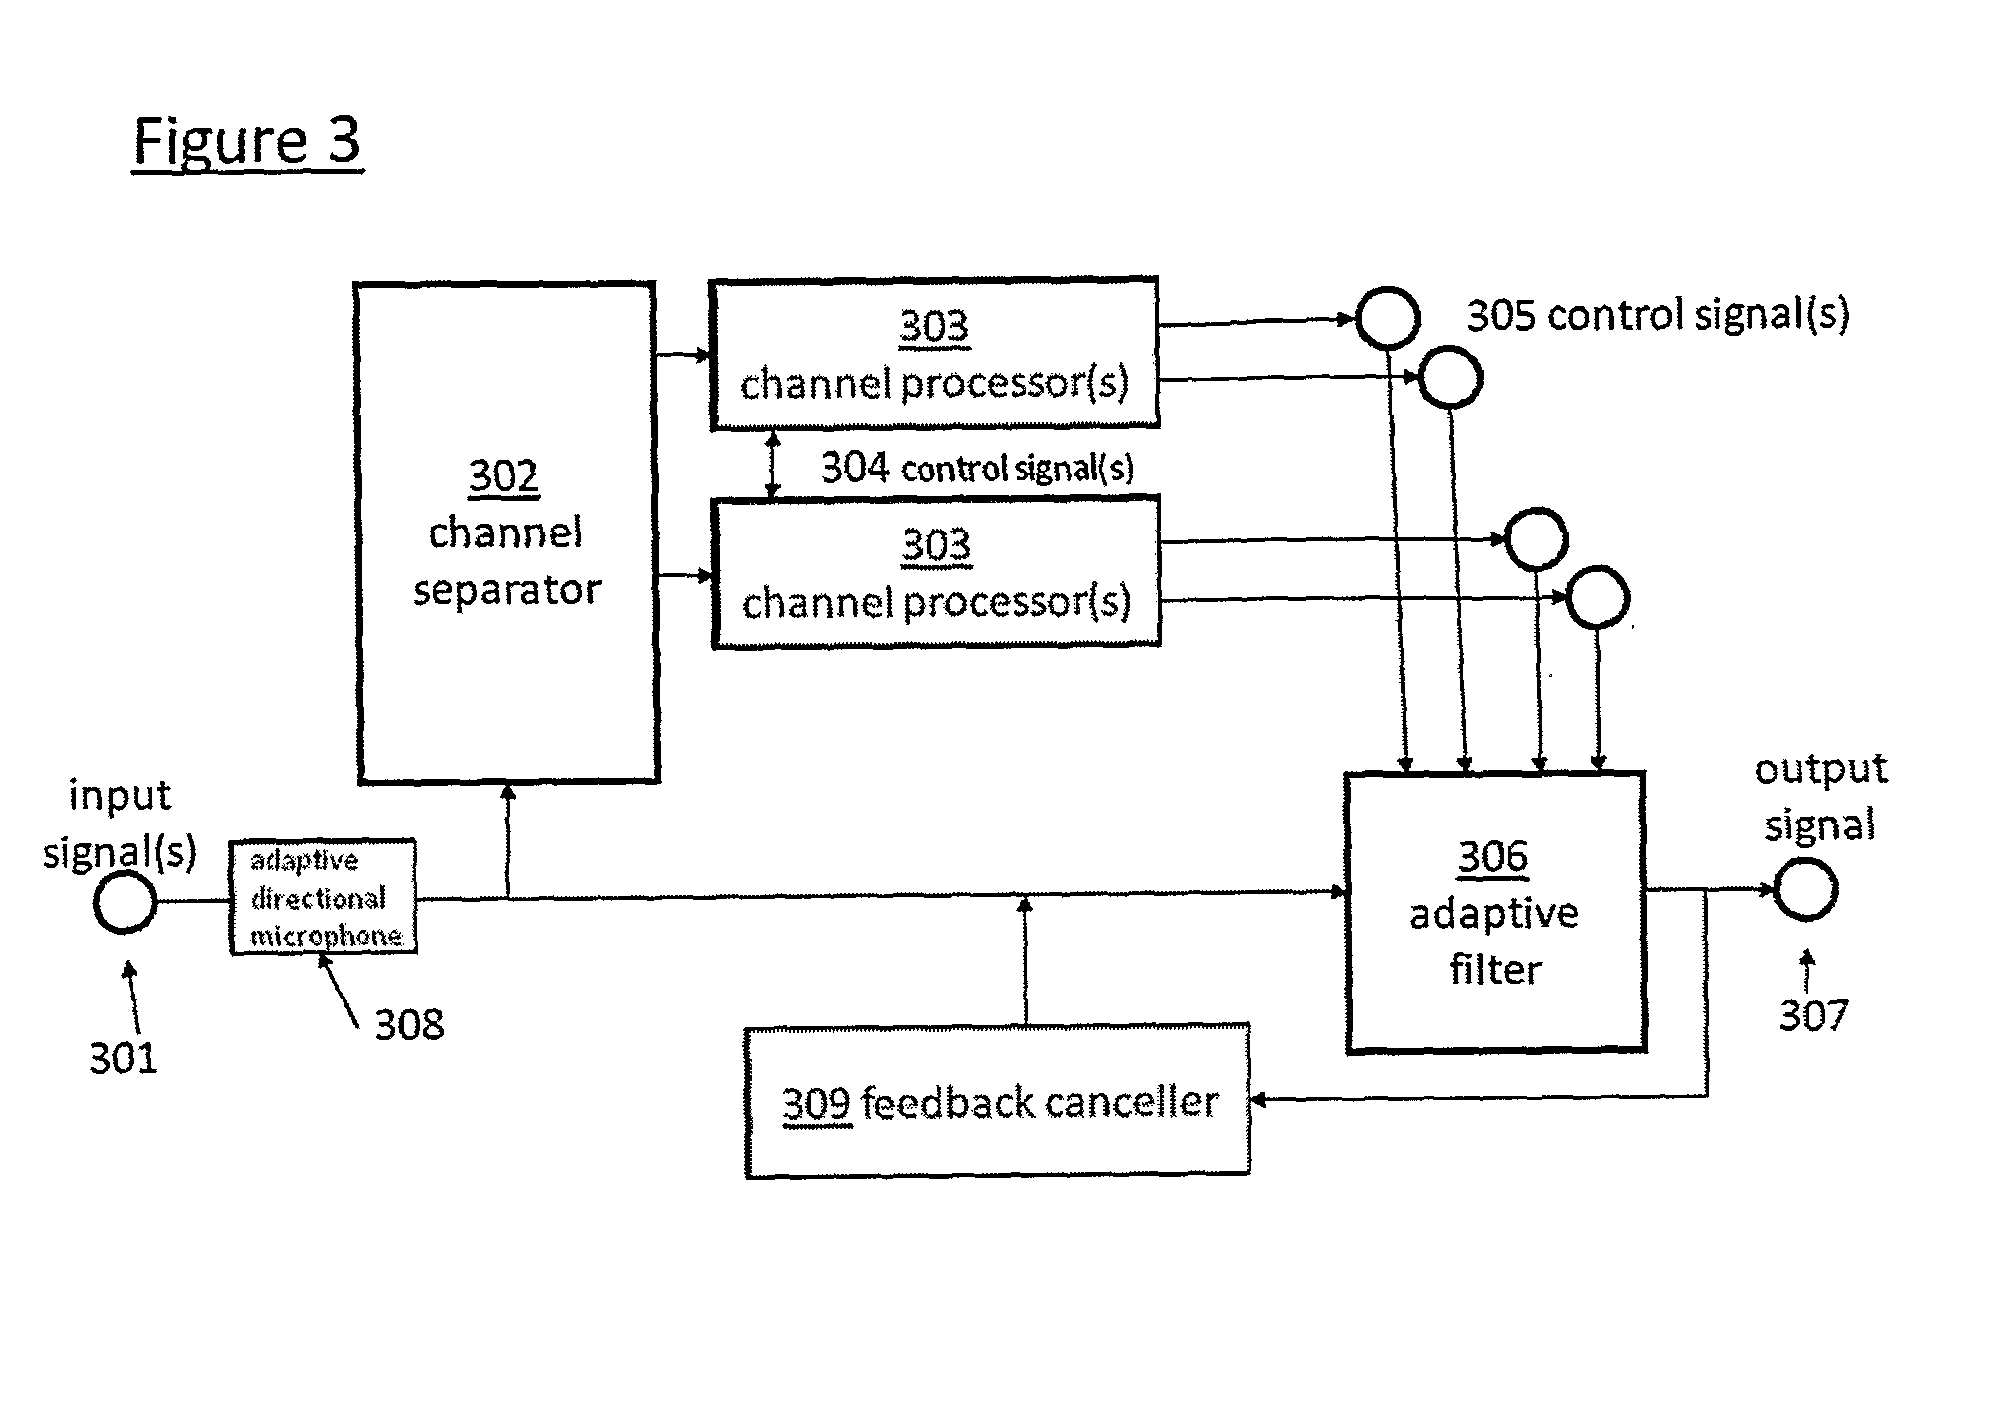 Automated fitting of hearing devices